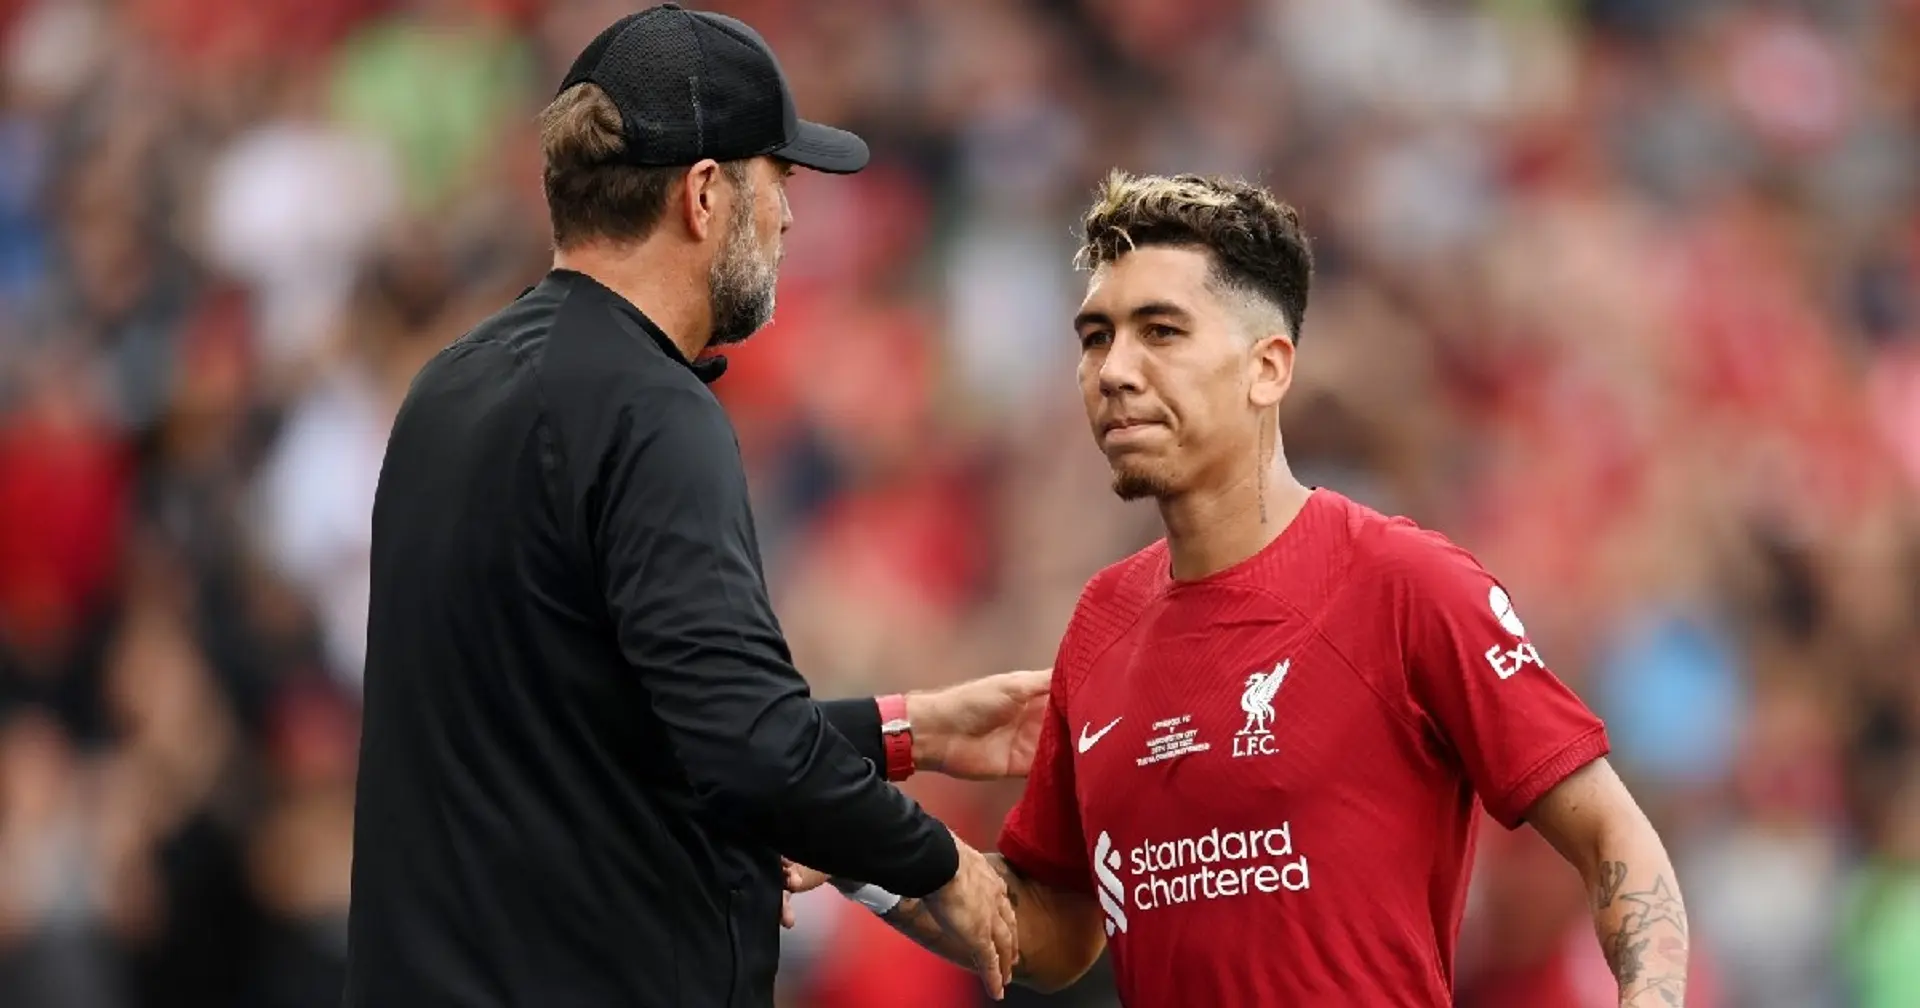 Liverpool prioritising Firmino contract extension & 2 other under-radar stories 